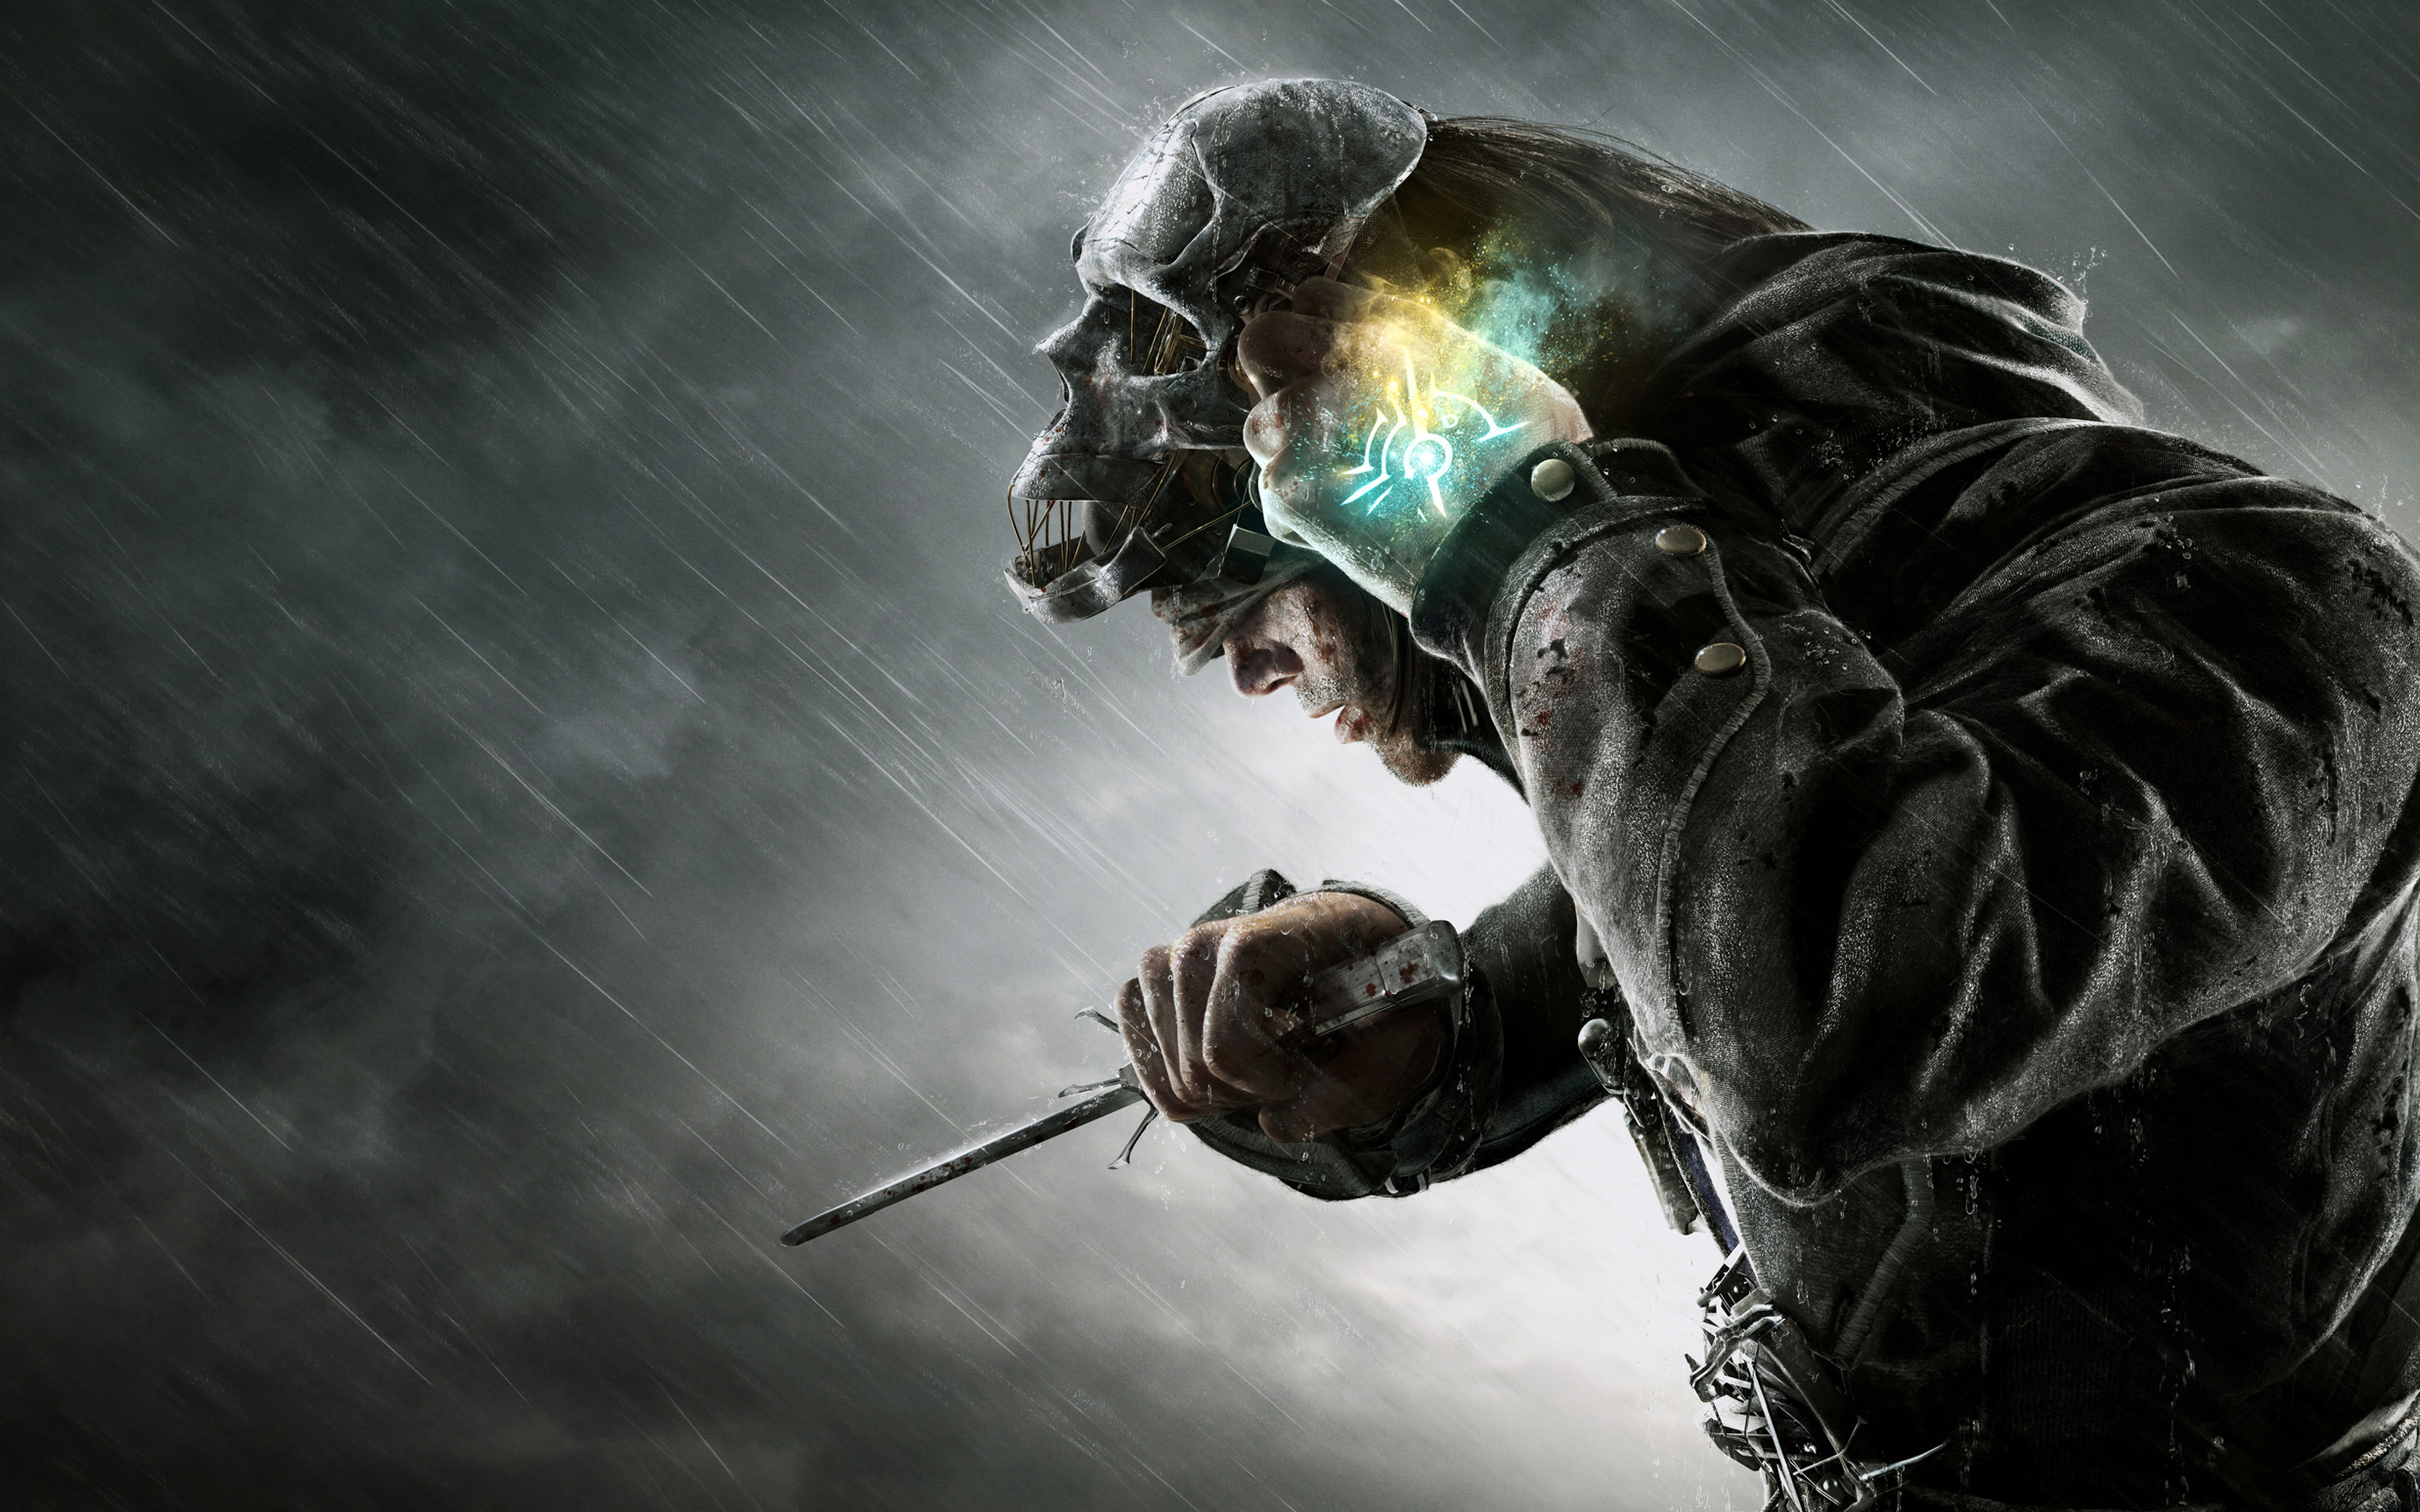 Dishonored Game - Wallpaper, High Definition, High Quality ...